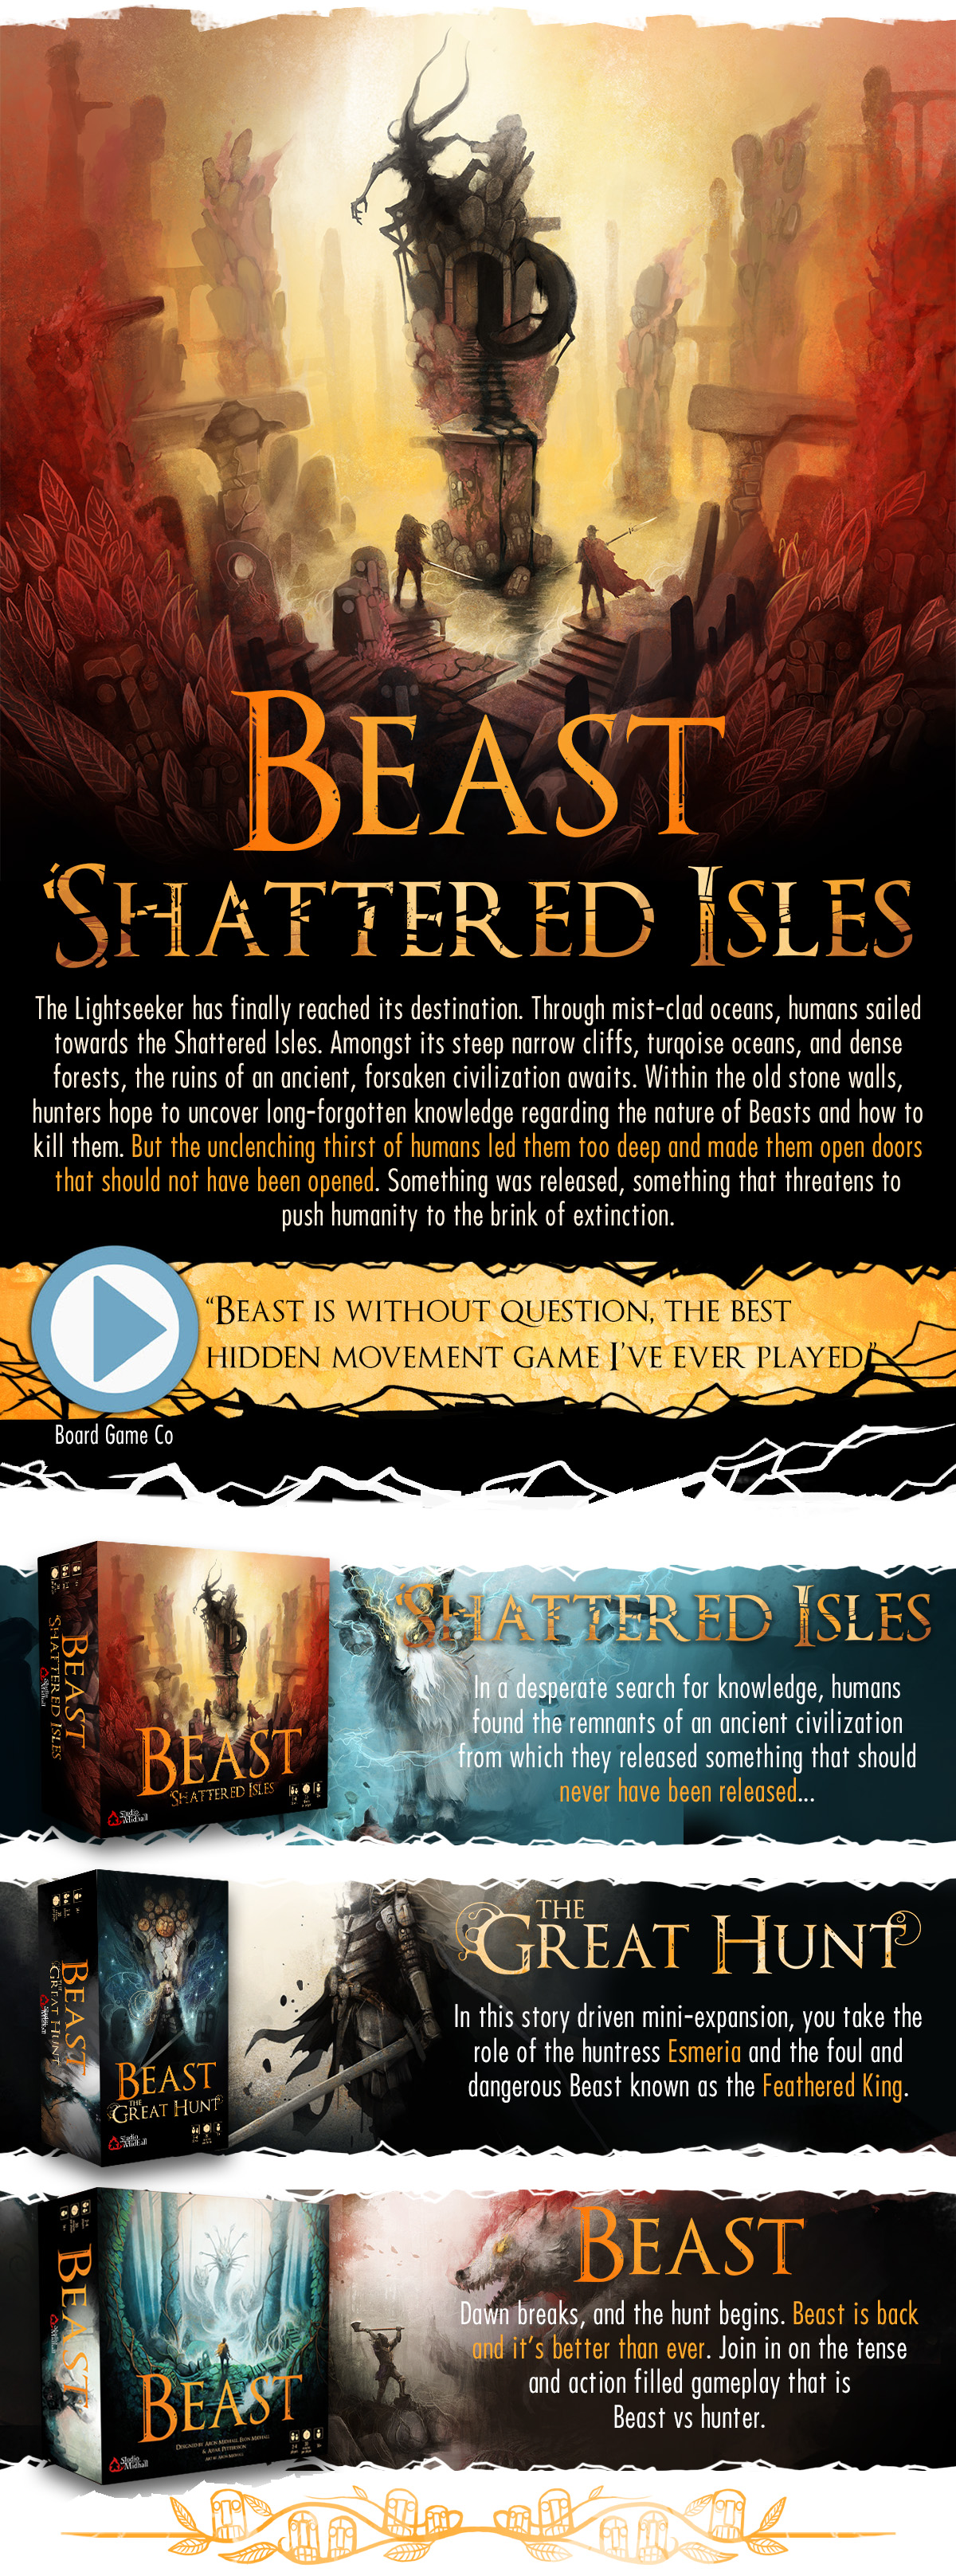 Beast - Shattered Isles by Studio Midhall - Gamefound